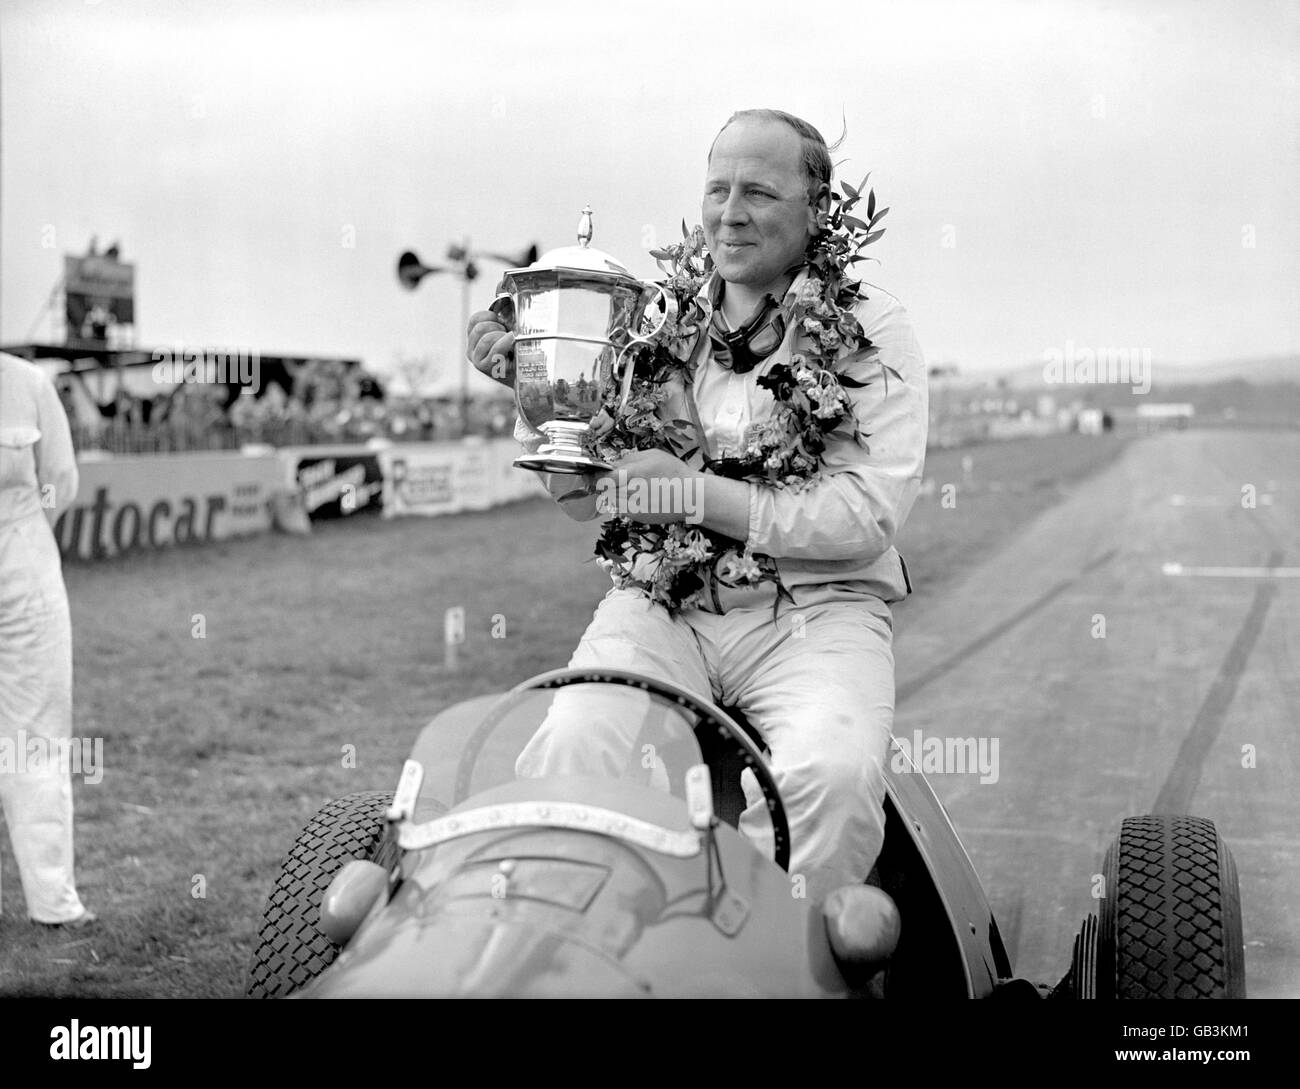 Motor Racing - Festival of Britain Trophy - Final - Goodwood. Reg Parnell shows off the Festival of Britain Trophy after his win in the final Stock Photo